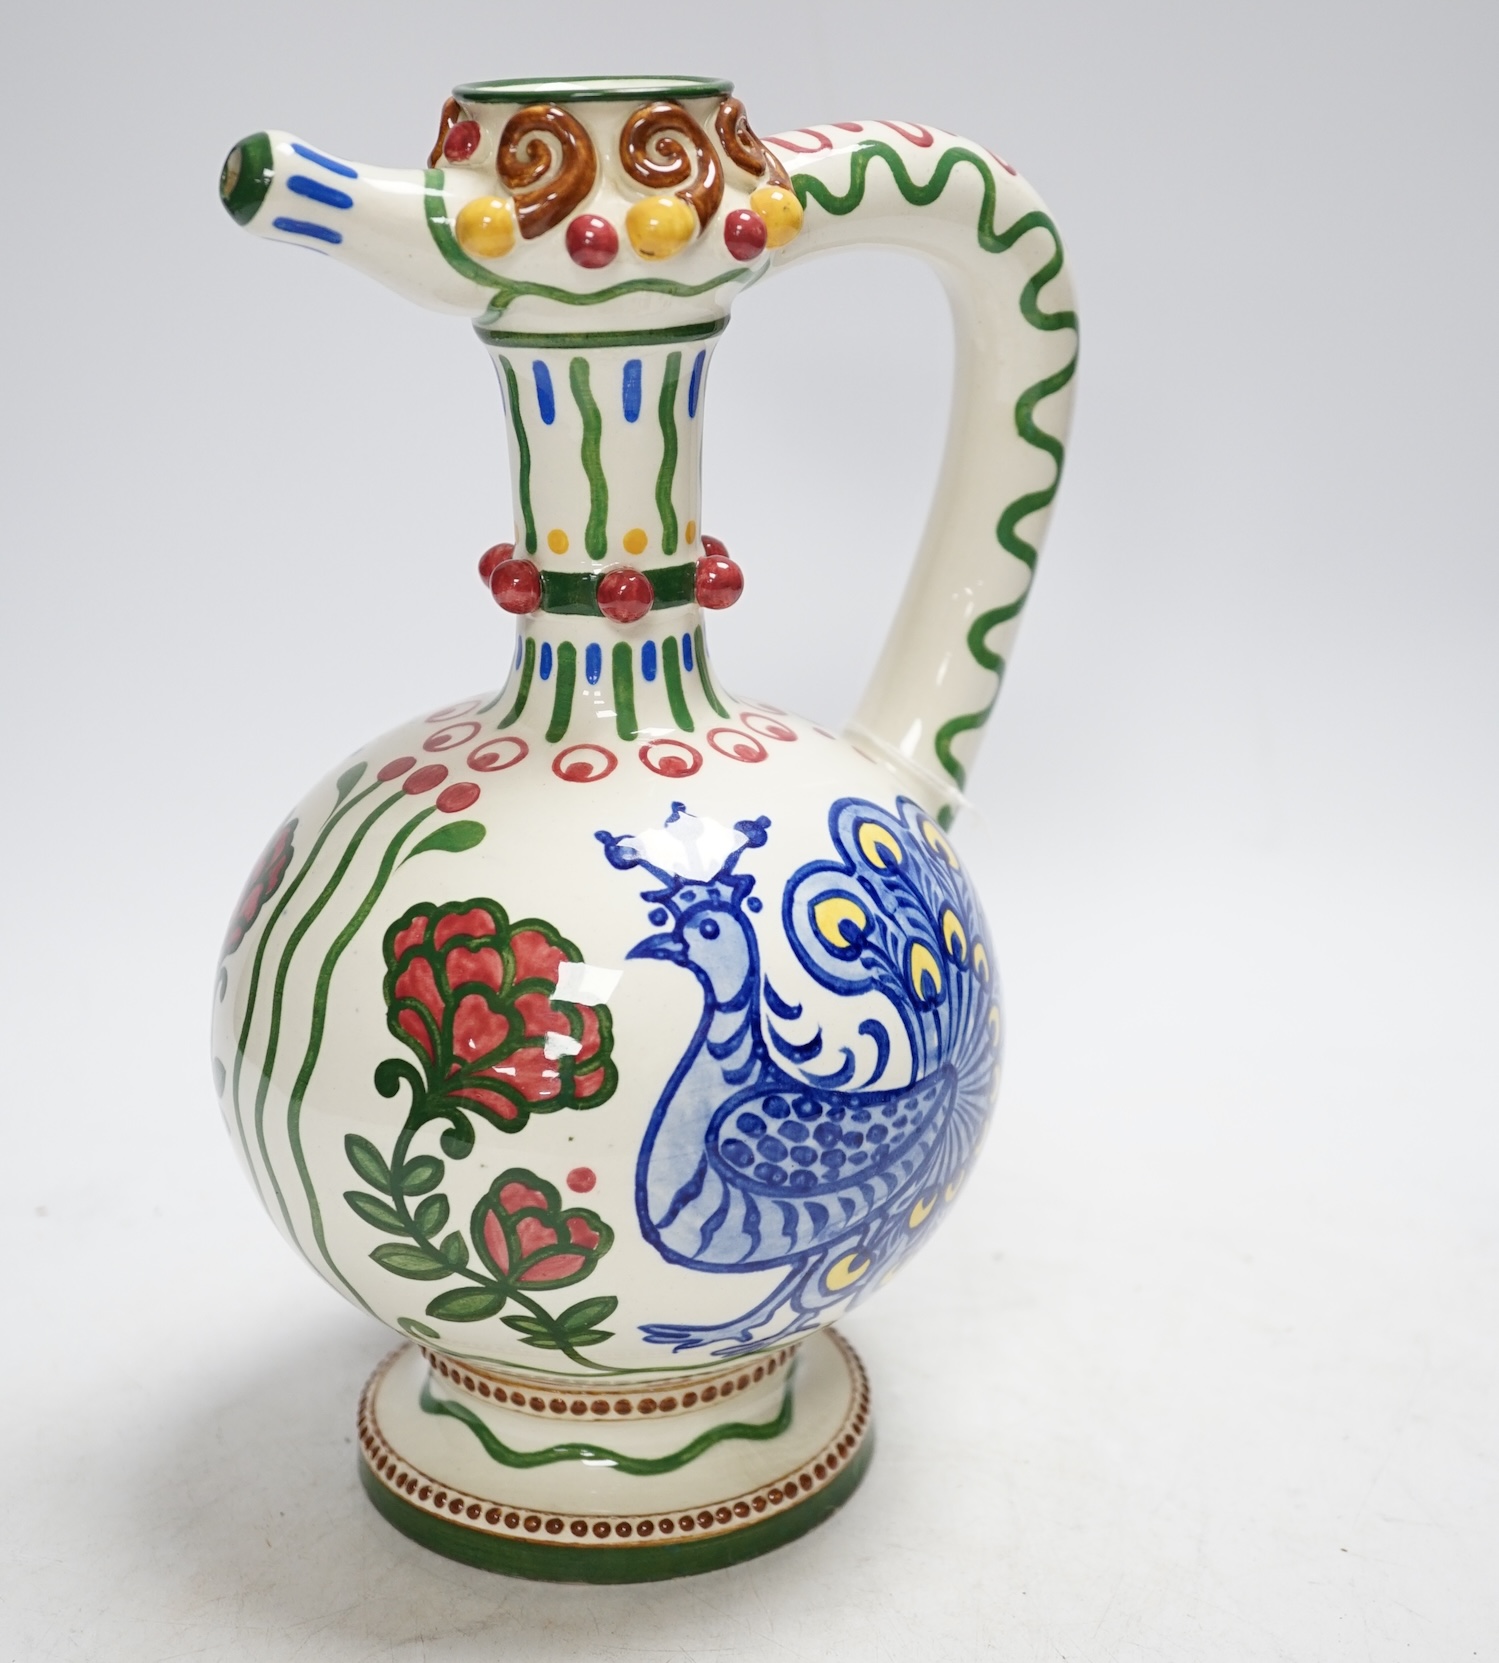 A Zsolnay jug or ewer decorated with peacocks and flowers, stamped ‘Zsolnay 830 and 07’ to the base, 24.5cm high                                                                                                            